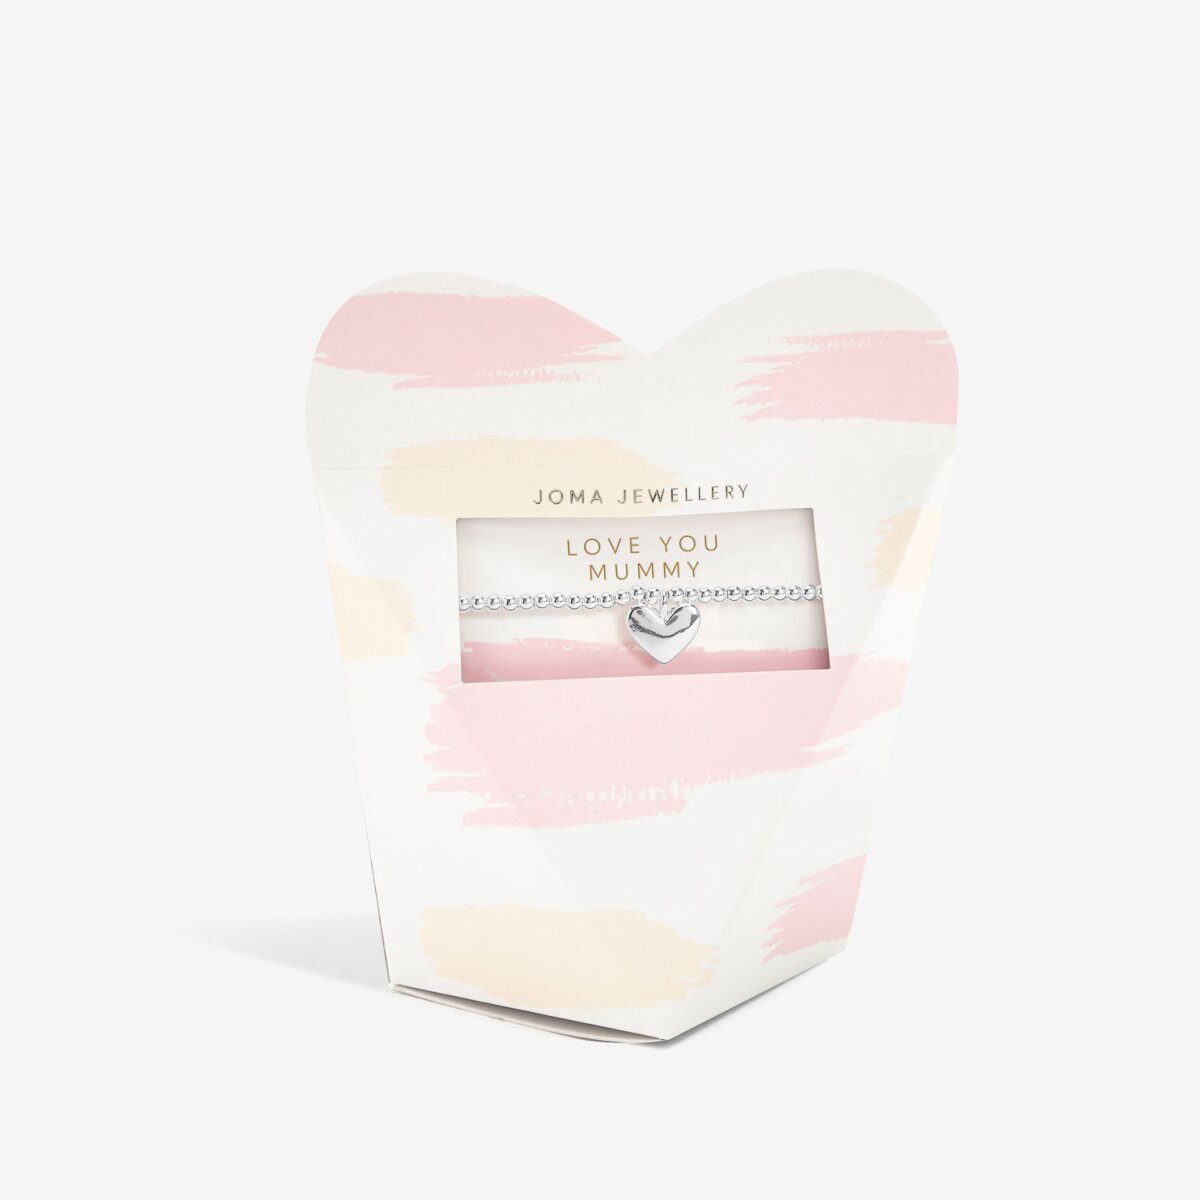 JOMA JEWELLERY | MOTHER'S DAY FROM THE HEART GIFT BOX | LOVE YOU MUMMY BRACELET